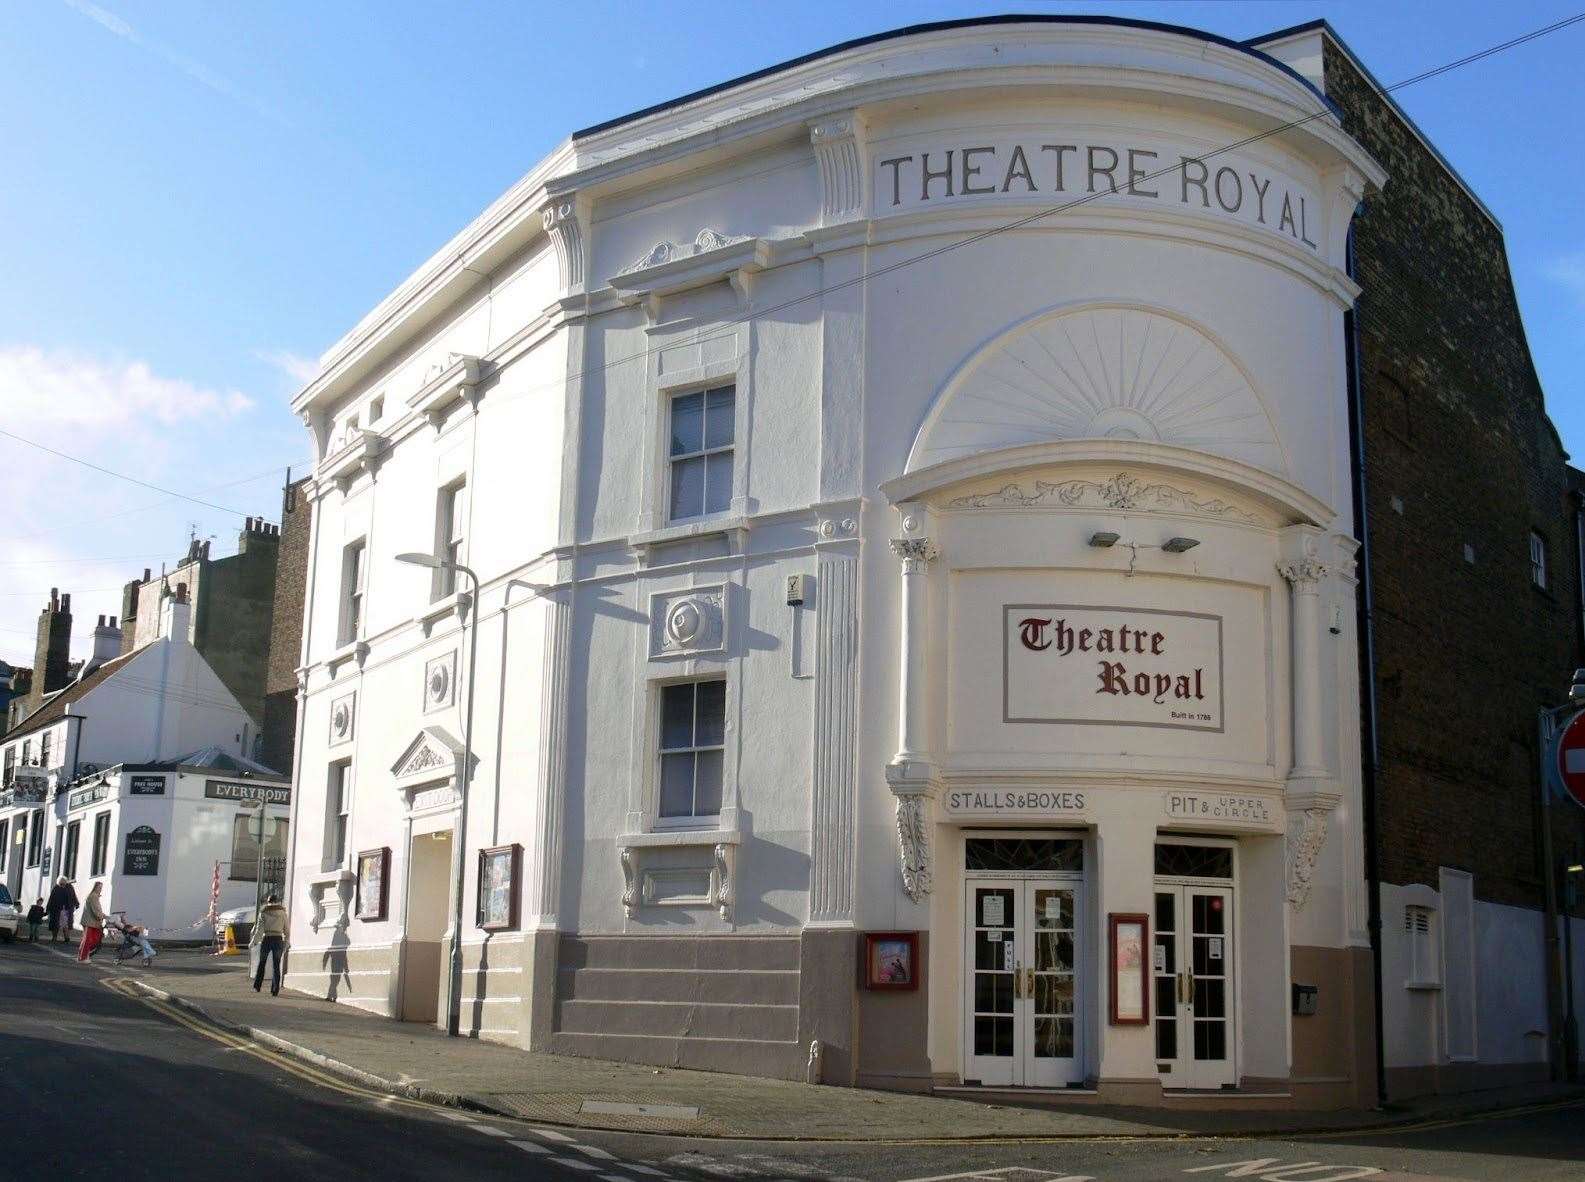 The Theatre Royal in Margate is going to be reinvigorated as part of plans to bring a new performing arts hub to Kent.